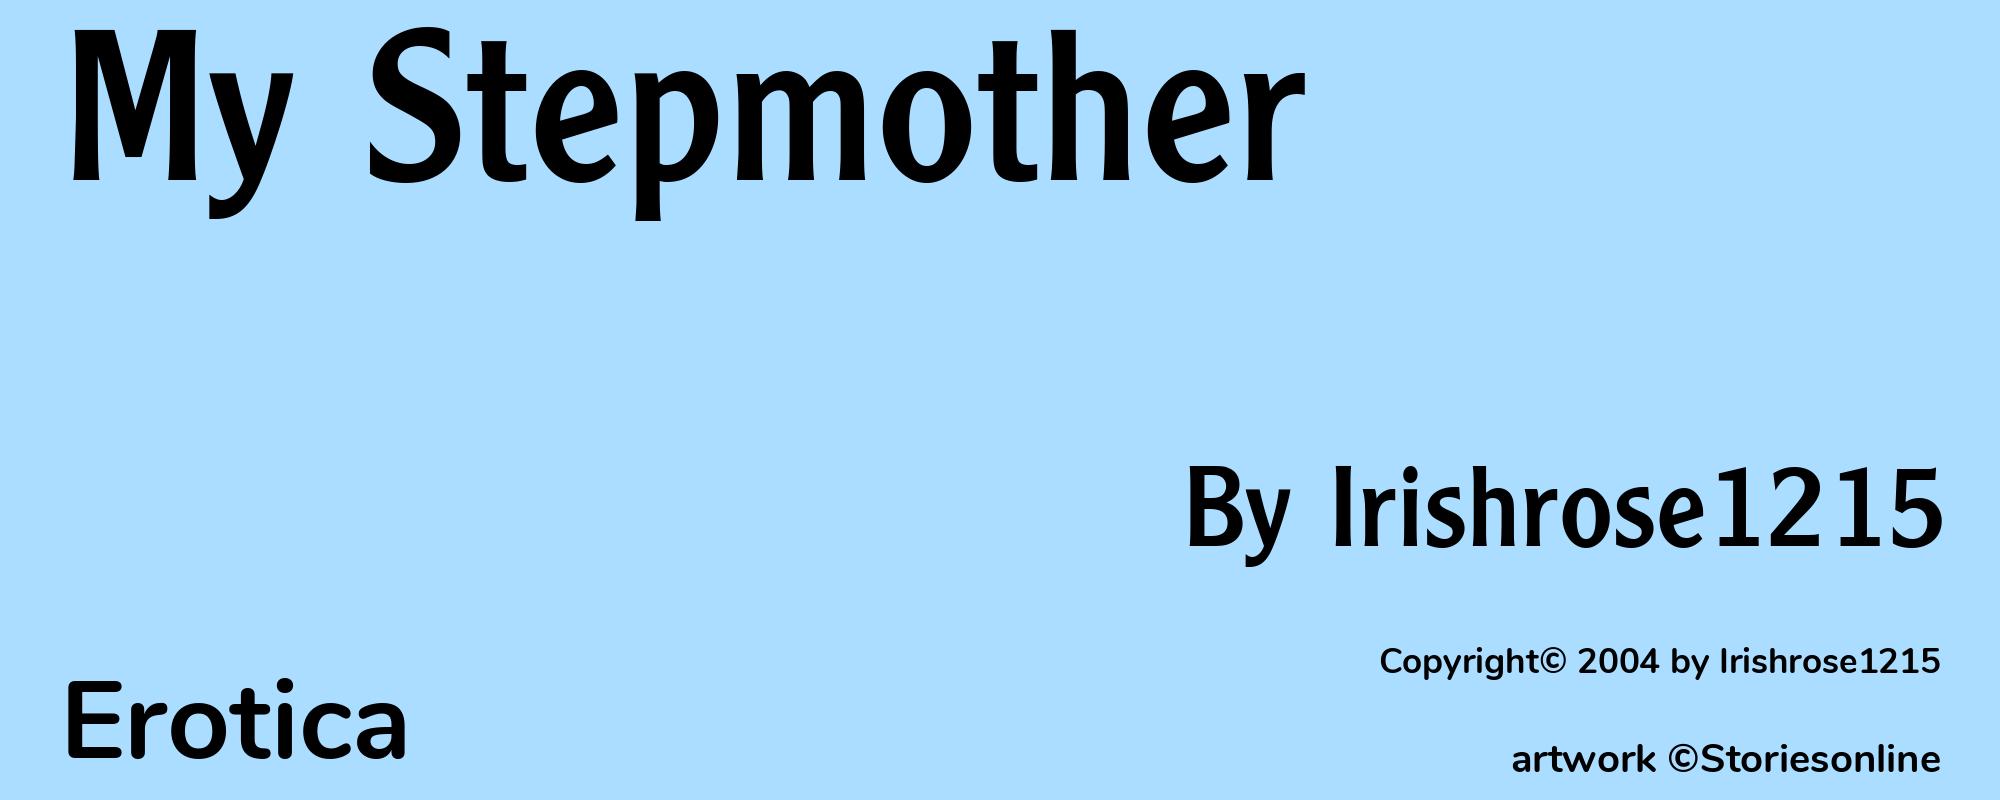 My Stepmother - Cover